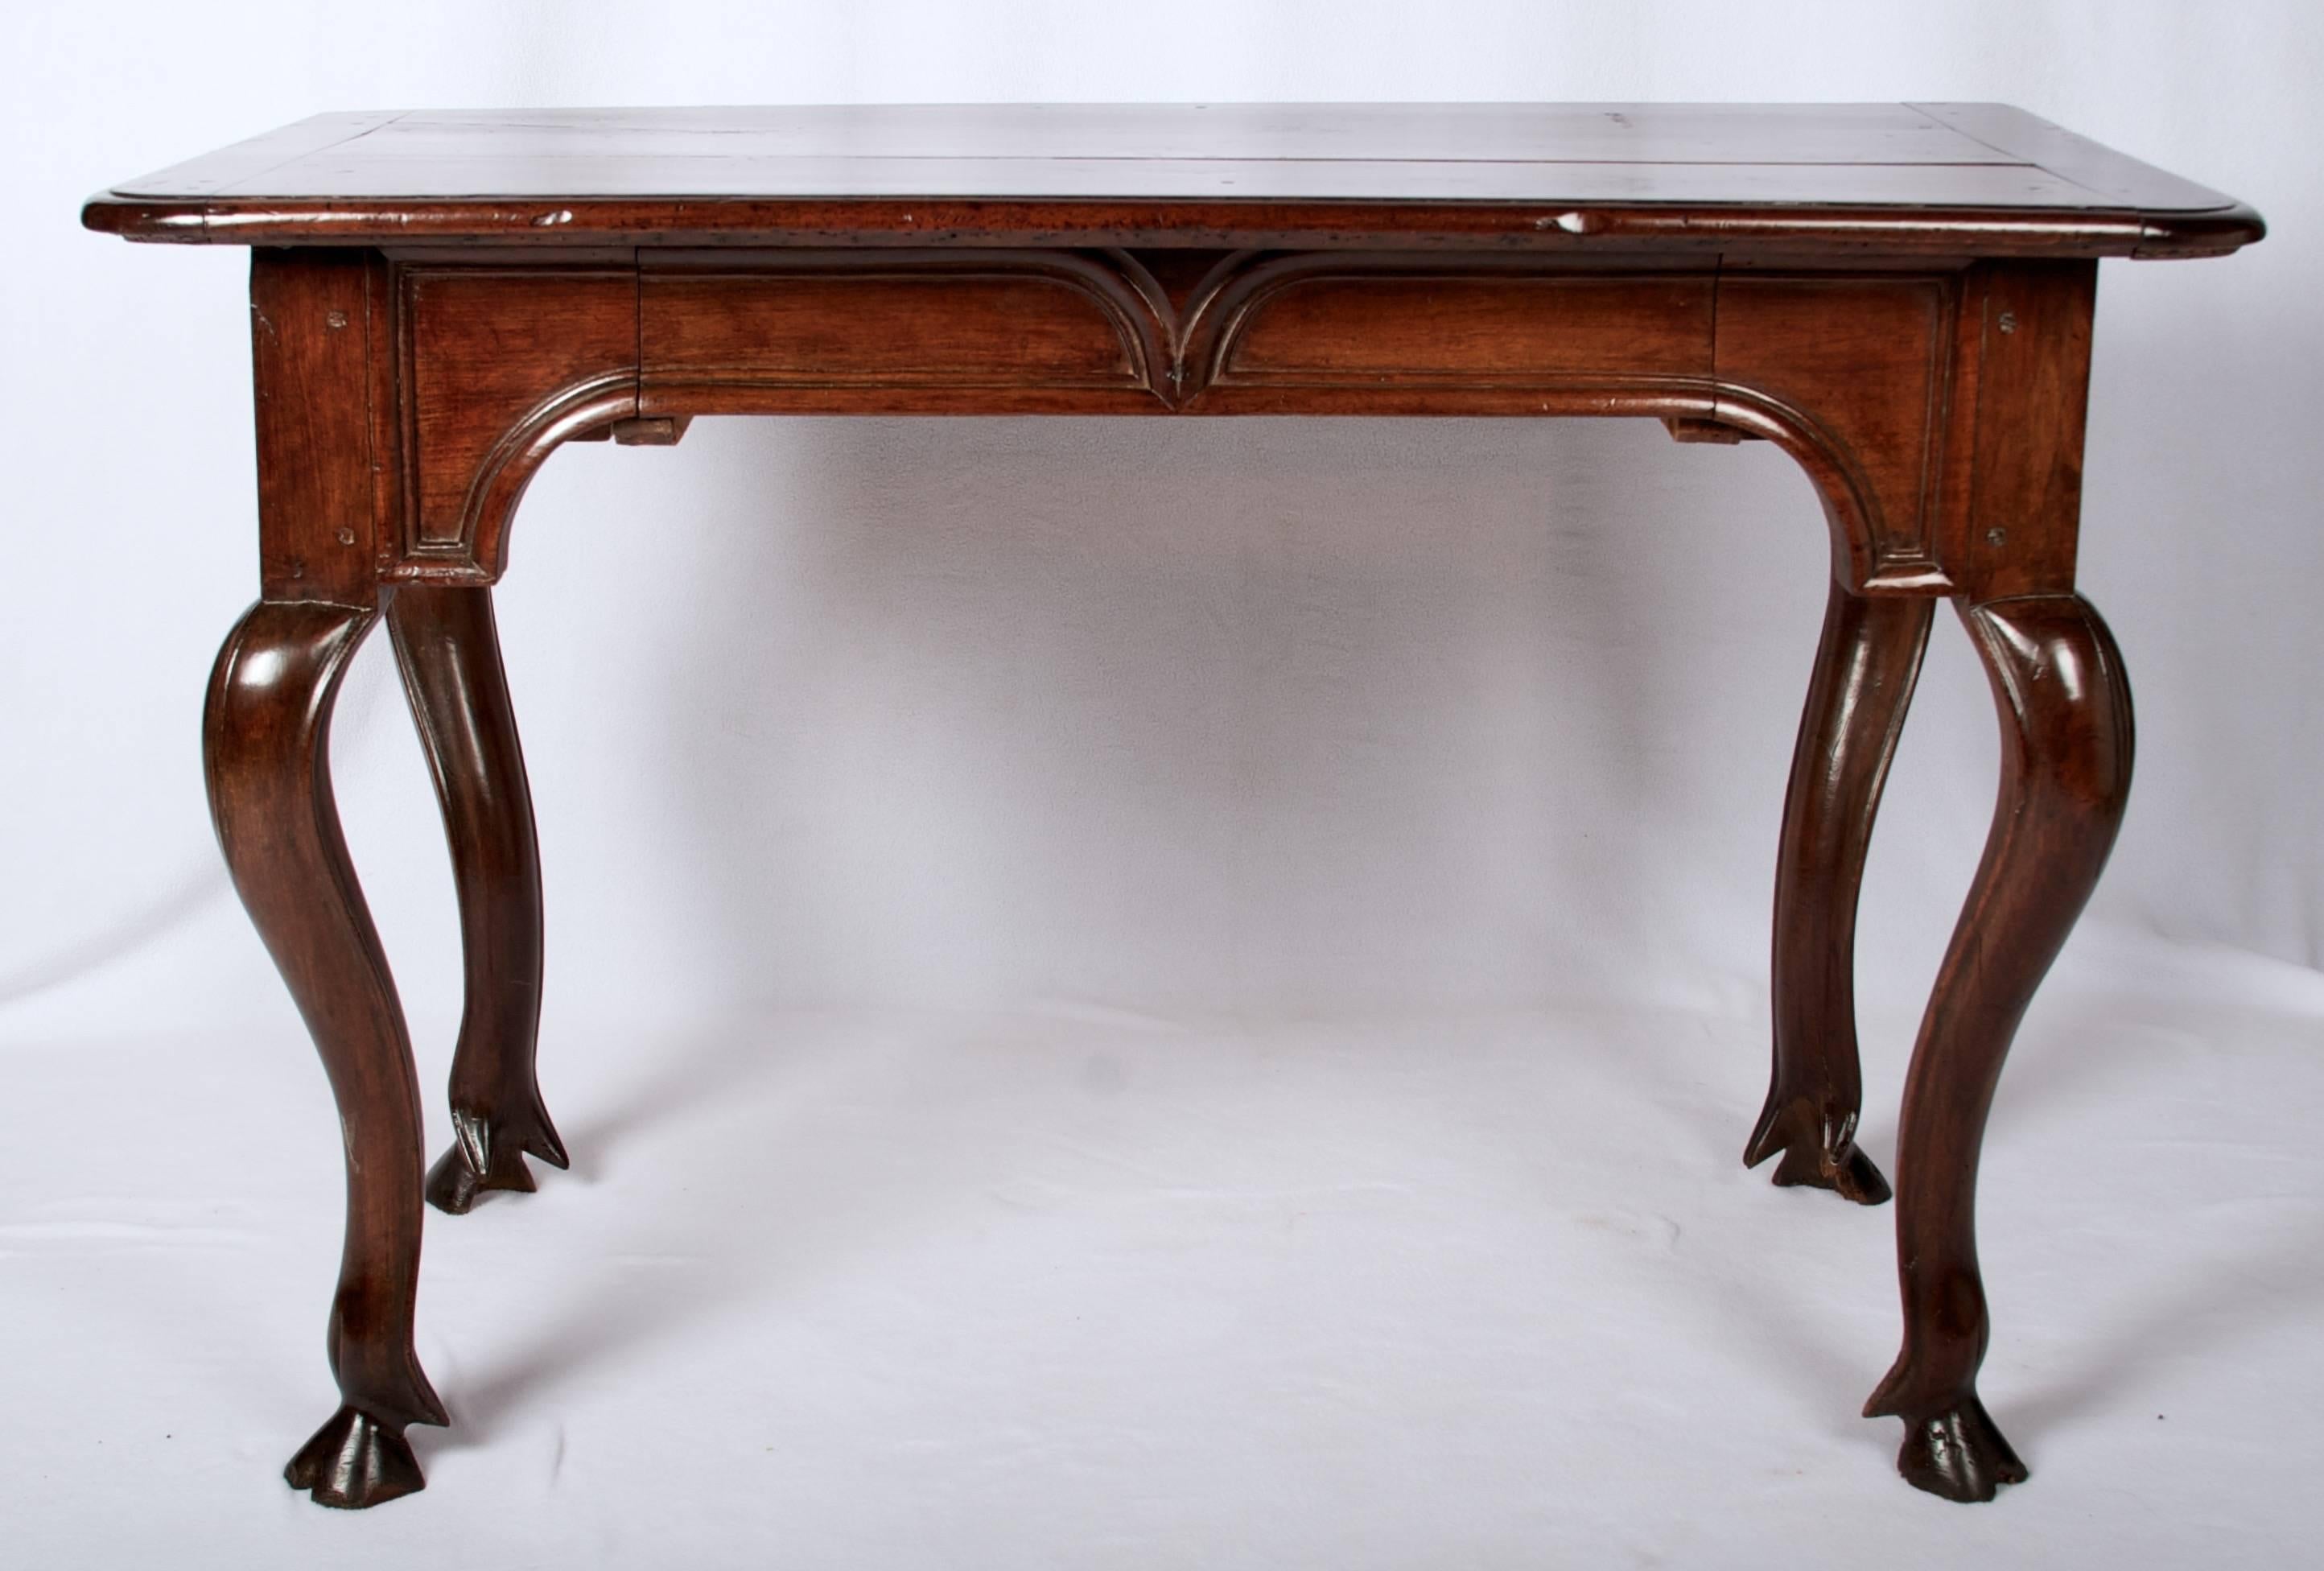 A wonderfully proportioned table with a drawer, from the Lombardy region
of Italy. The goat foot detail on the soft cabriolet leg is reminiscent of the
elaborate carved and gilded consoles of the same period. The finish is
original and has only